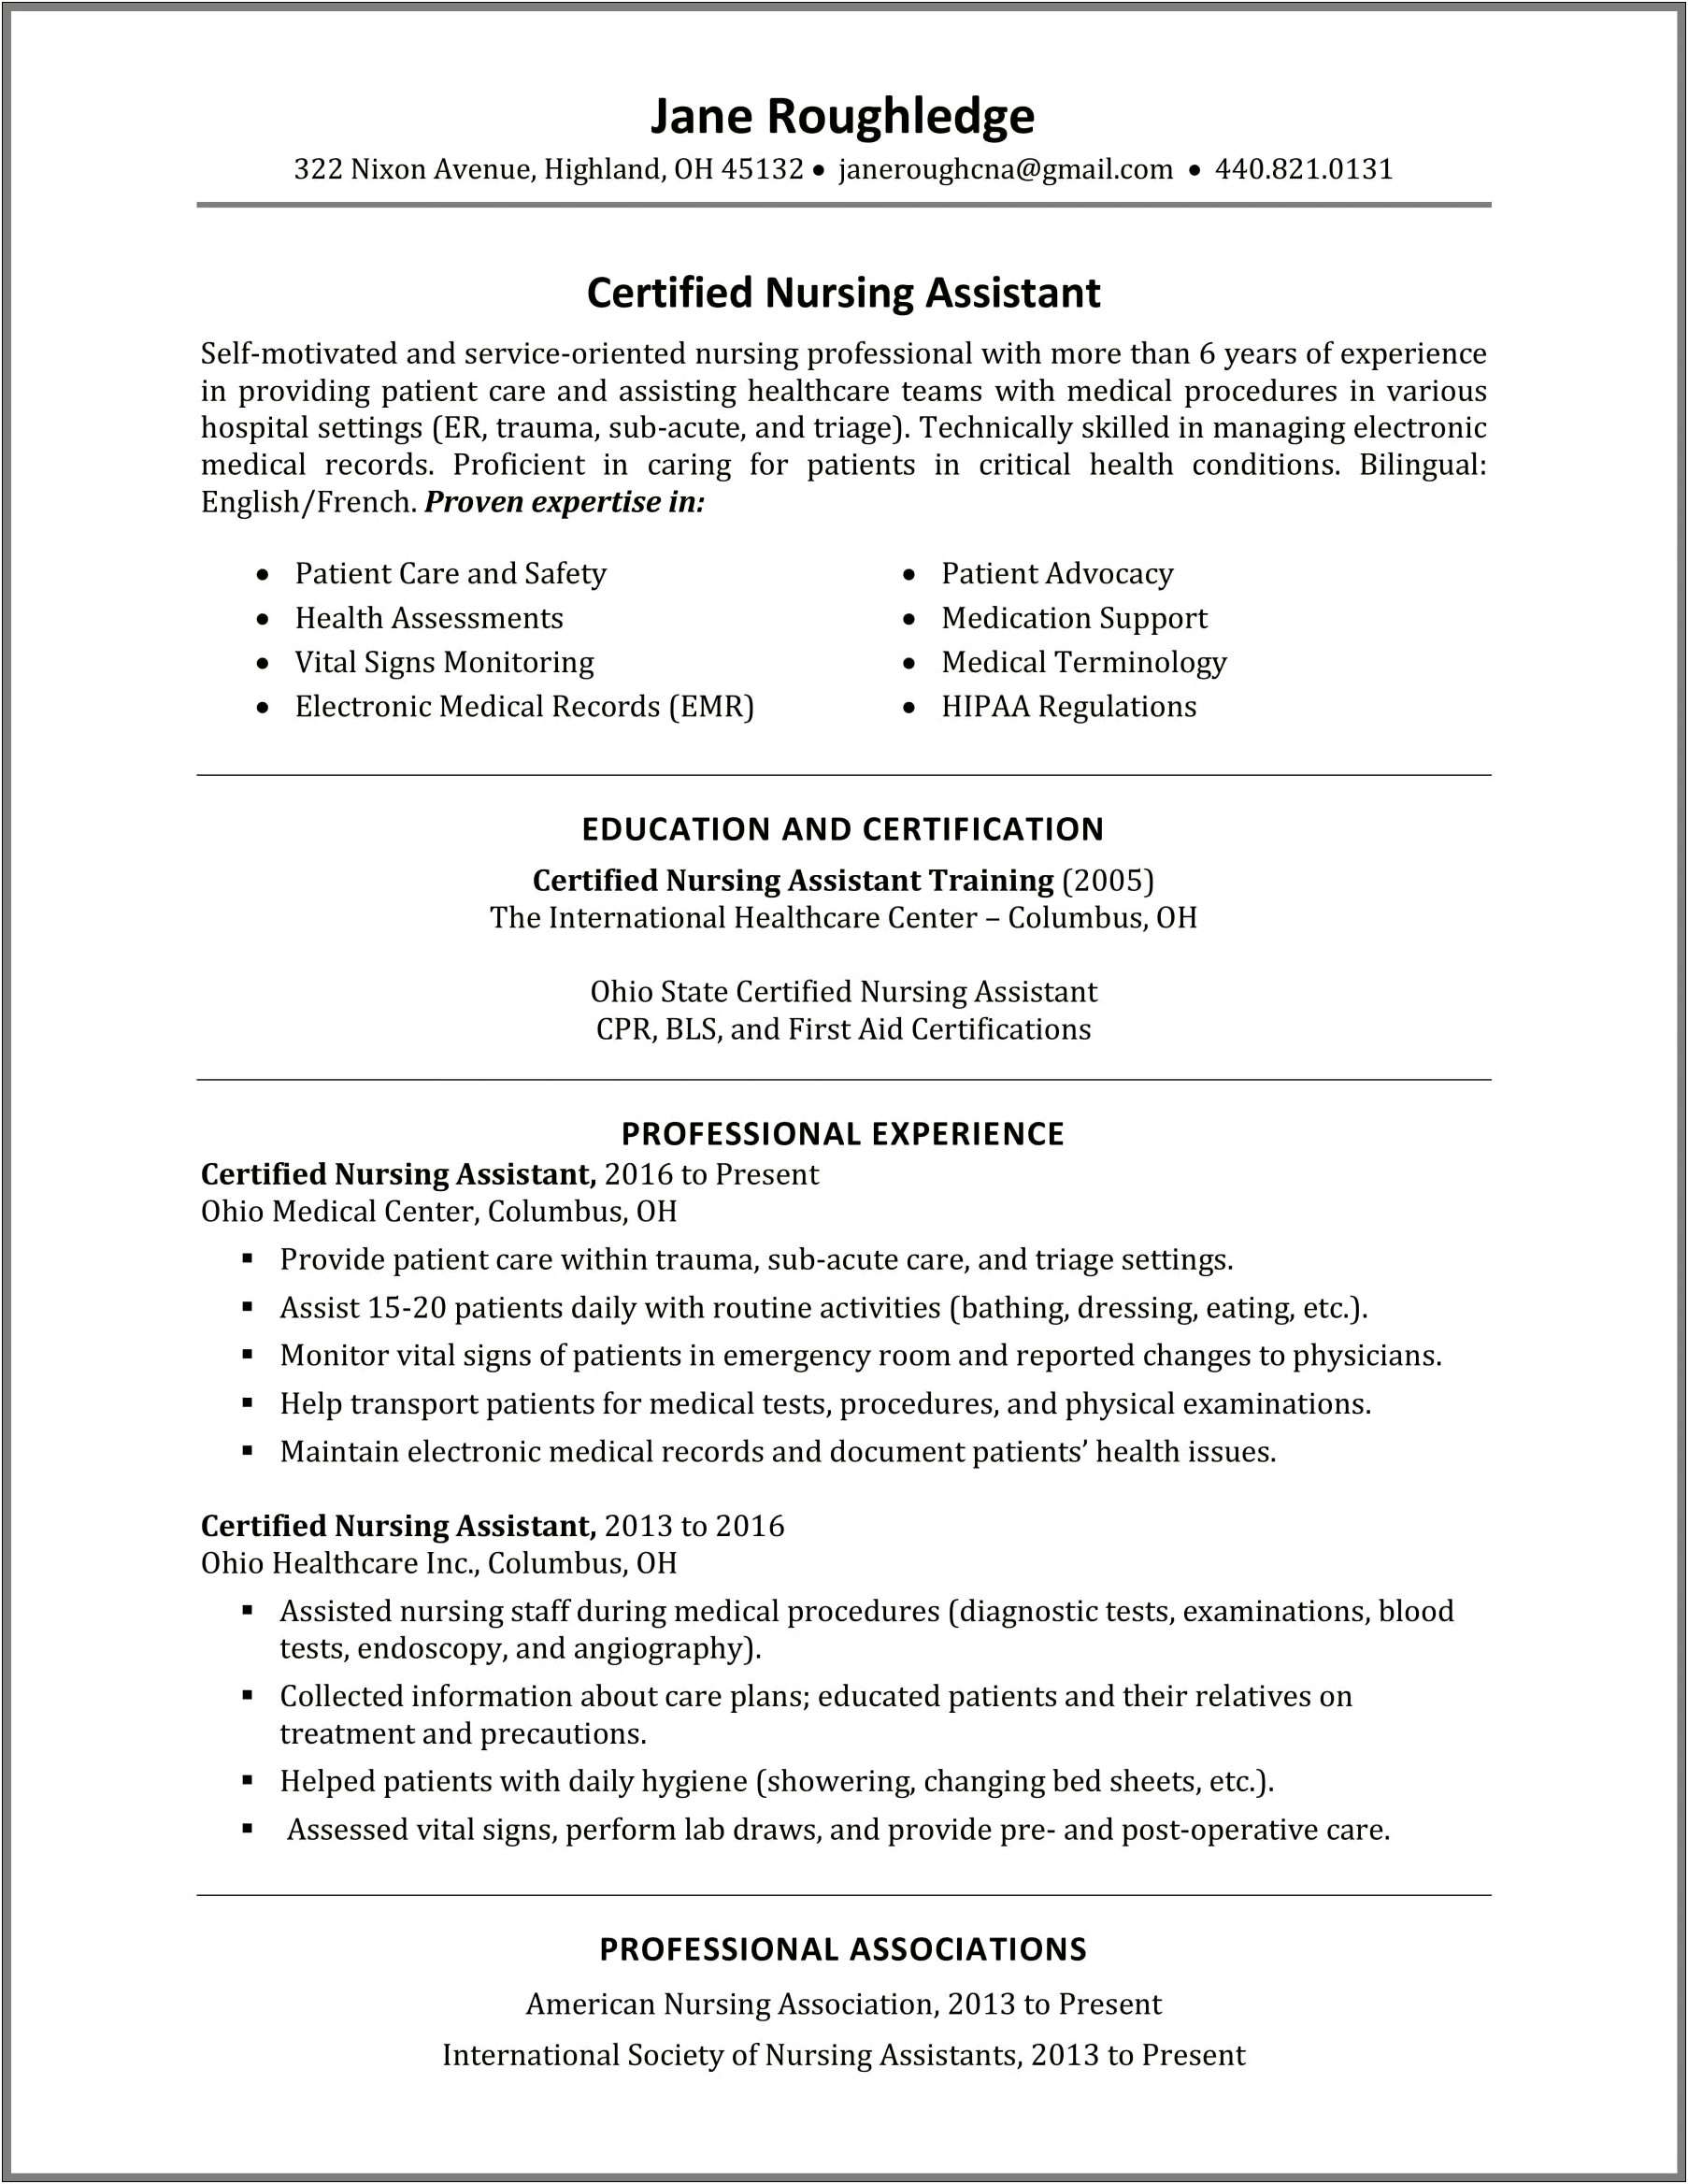 Resume Skills Examples For Cna